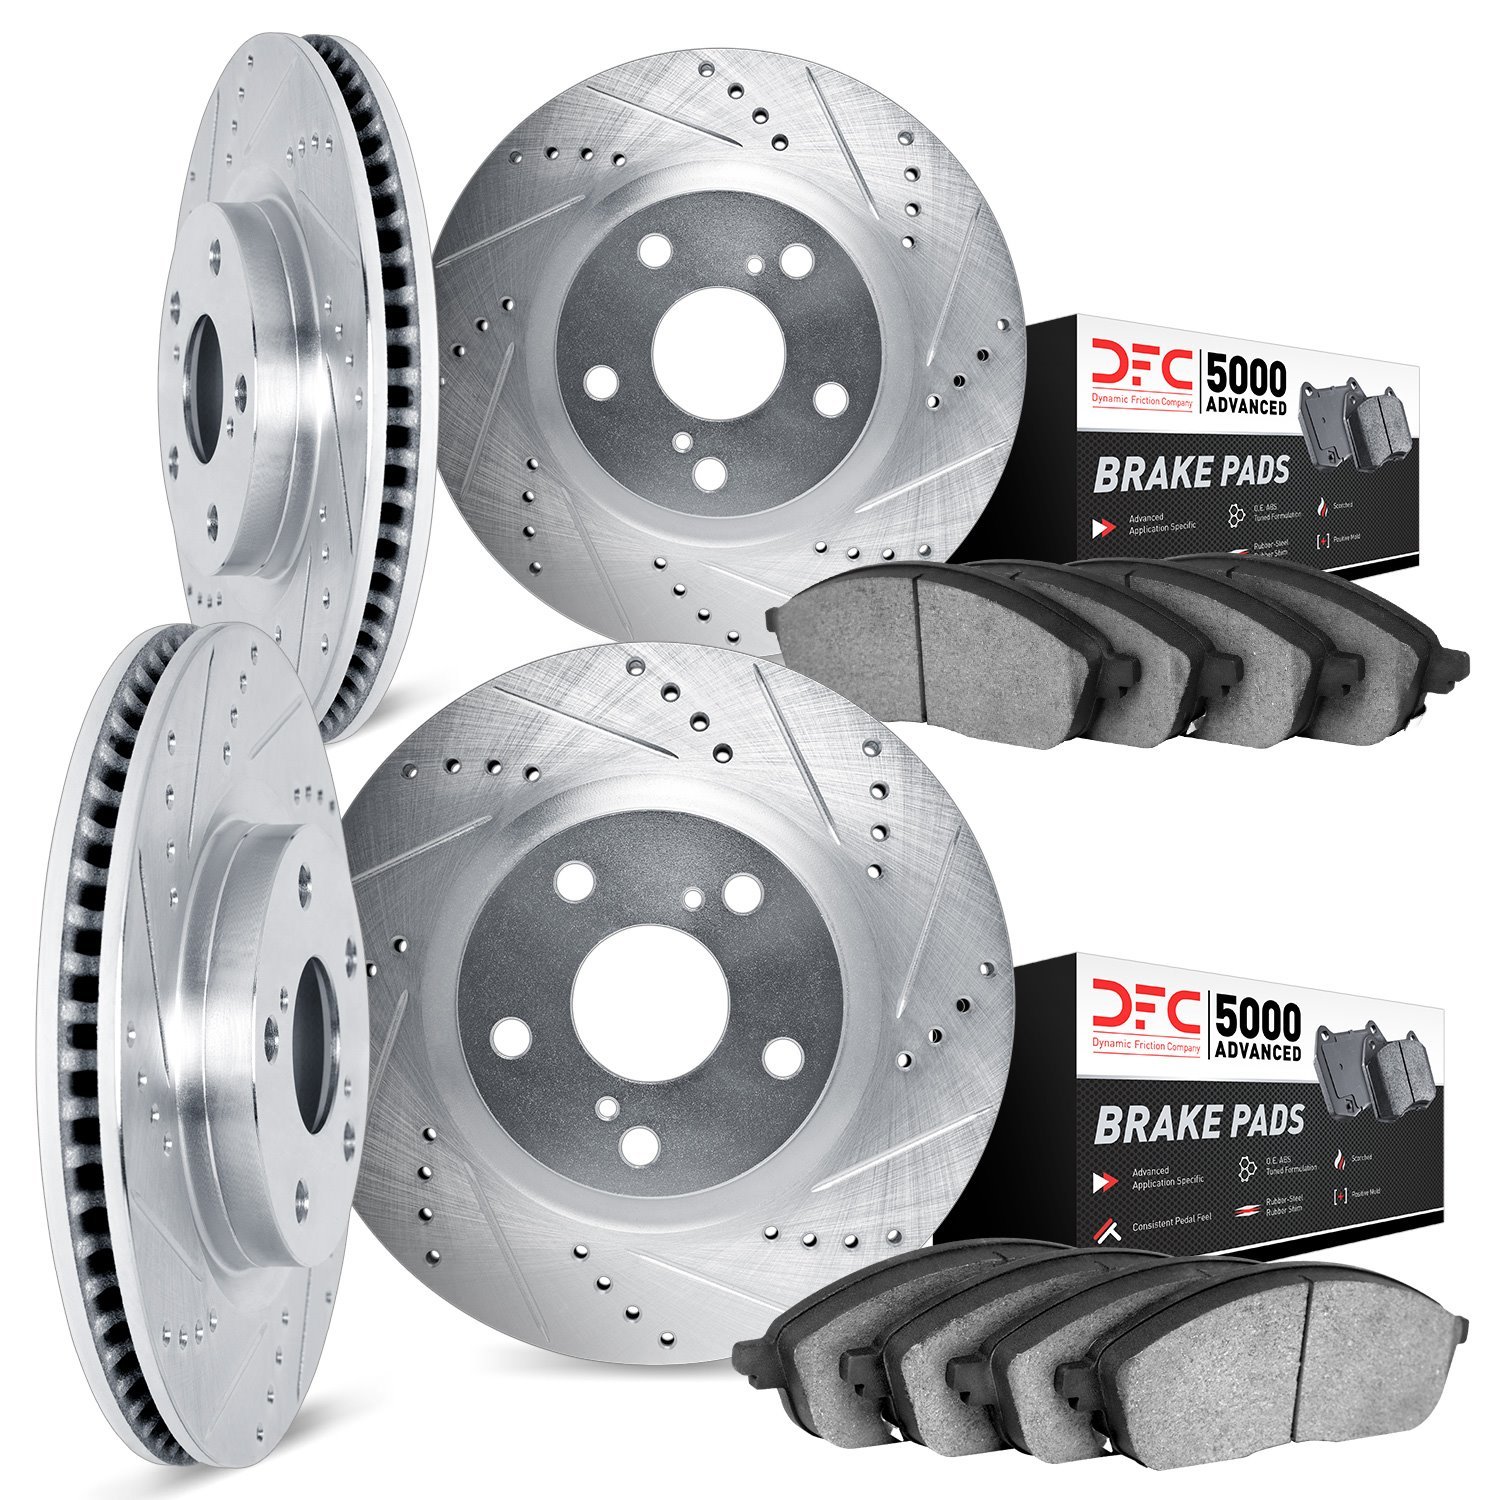 7504-20015 Drilled/Slotted Brake Rotors w/5000 Advanced Brake Pads Kit [Silver], 2019-2020 Jaguar, Position: Front and Rear